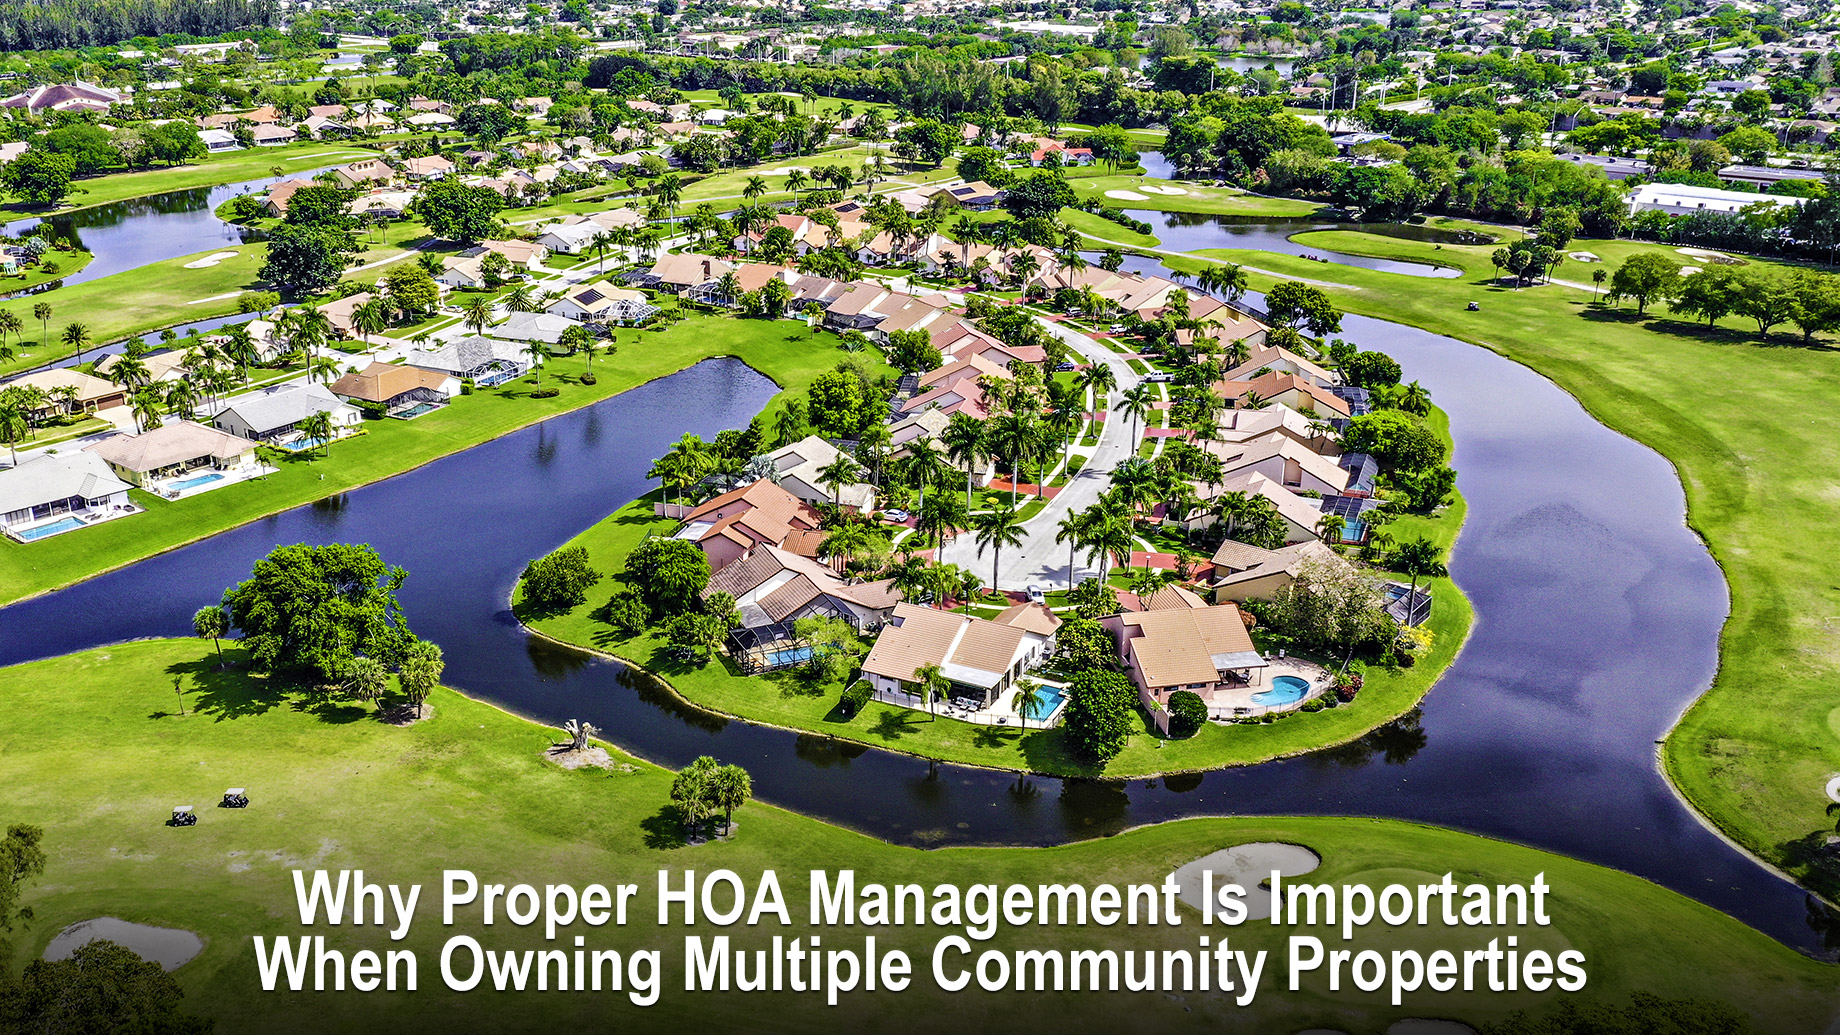 Why Proper HOA Management Is Important When Owning Multiple Community Properties